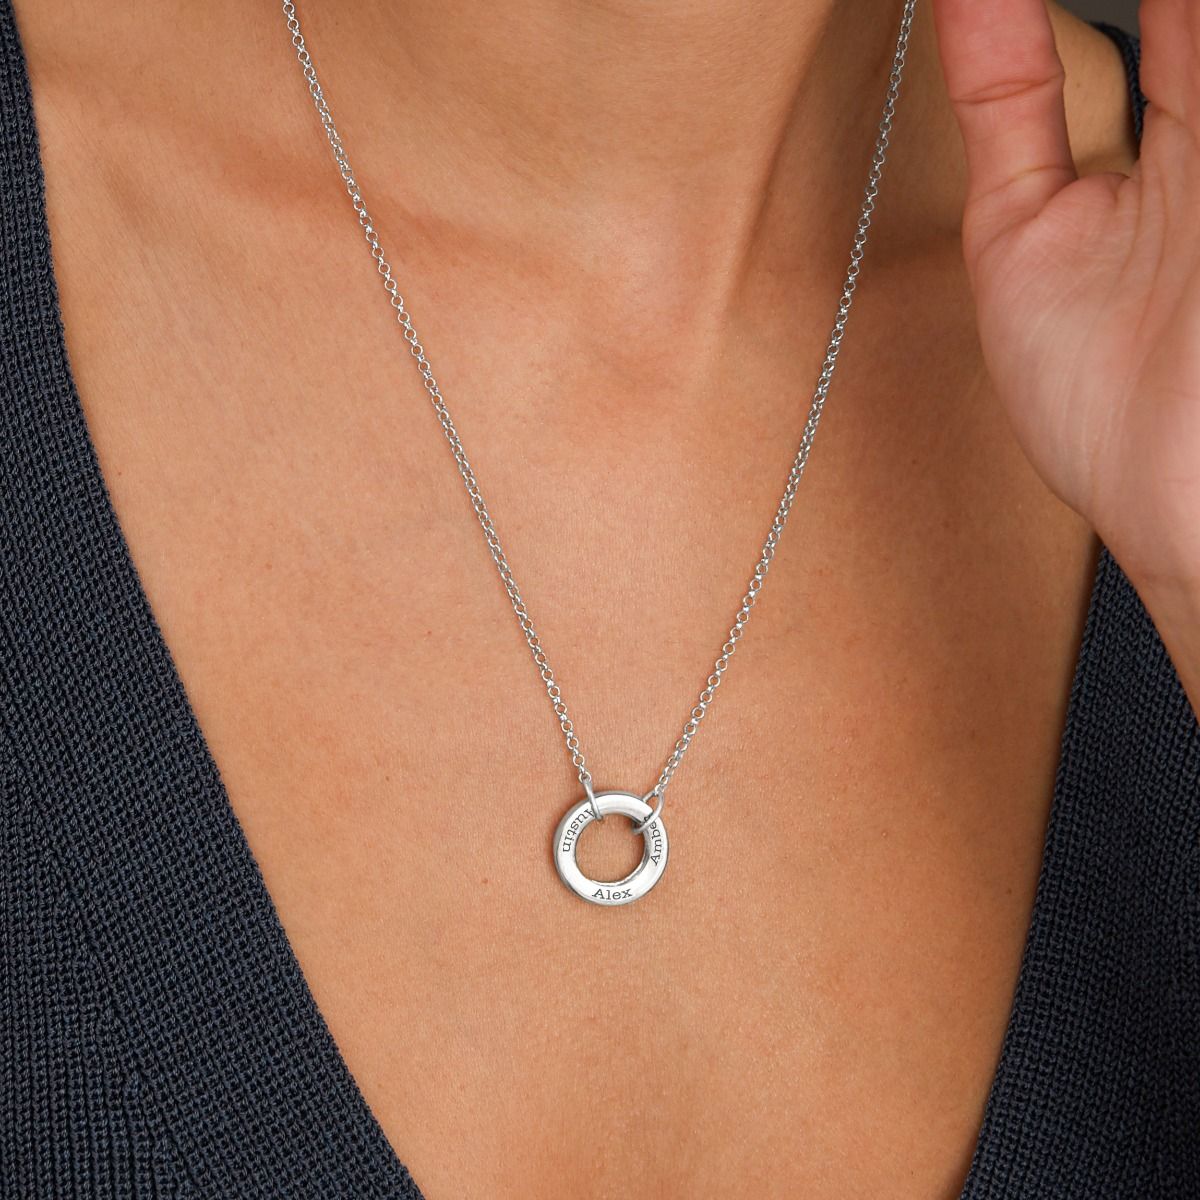 Name Necklace with Bold Curb Chain- Sterling Silver